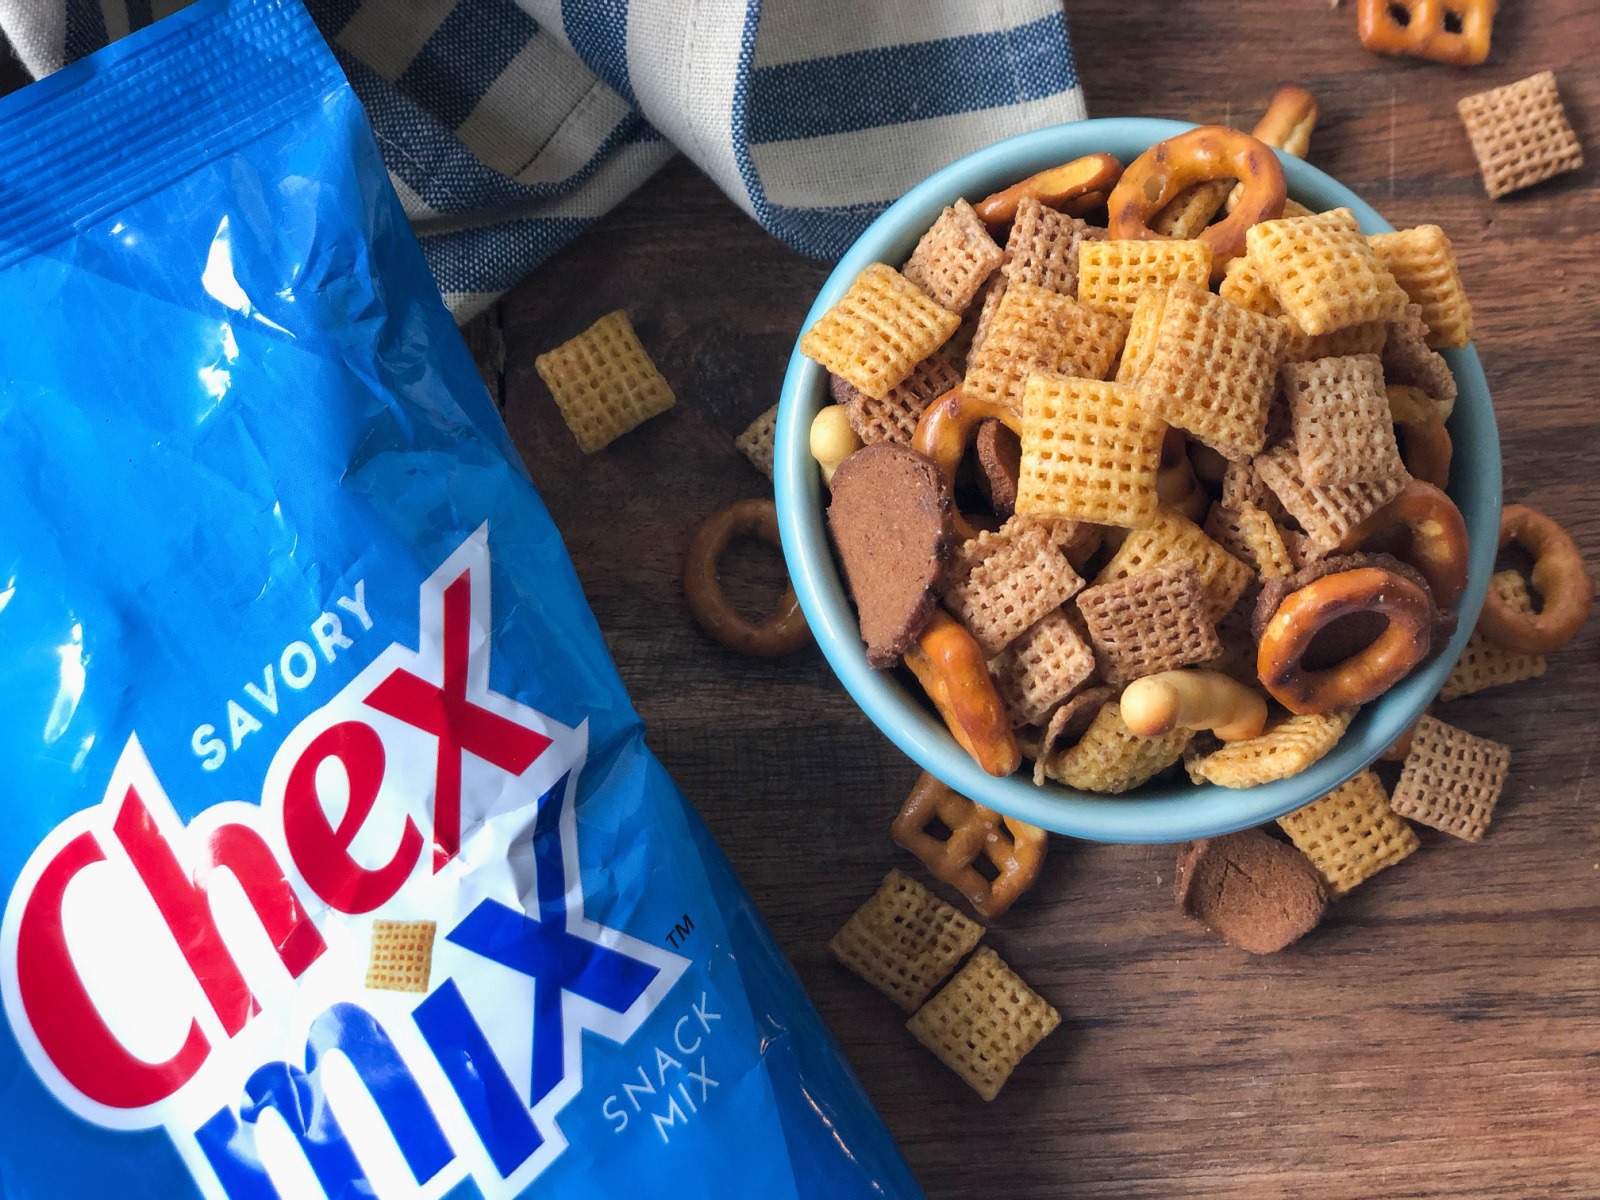 Get Family Size Bags Of Chex Mix For As Little As $2.35 Per Bag At Publix